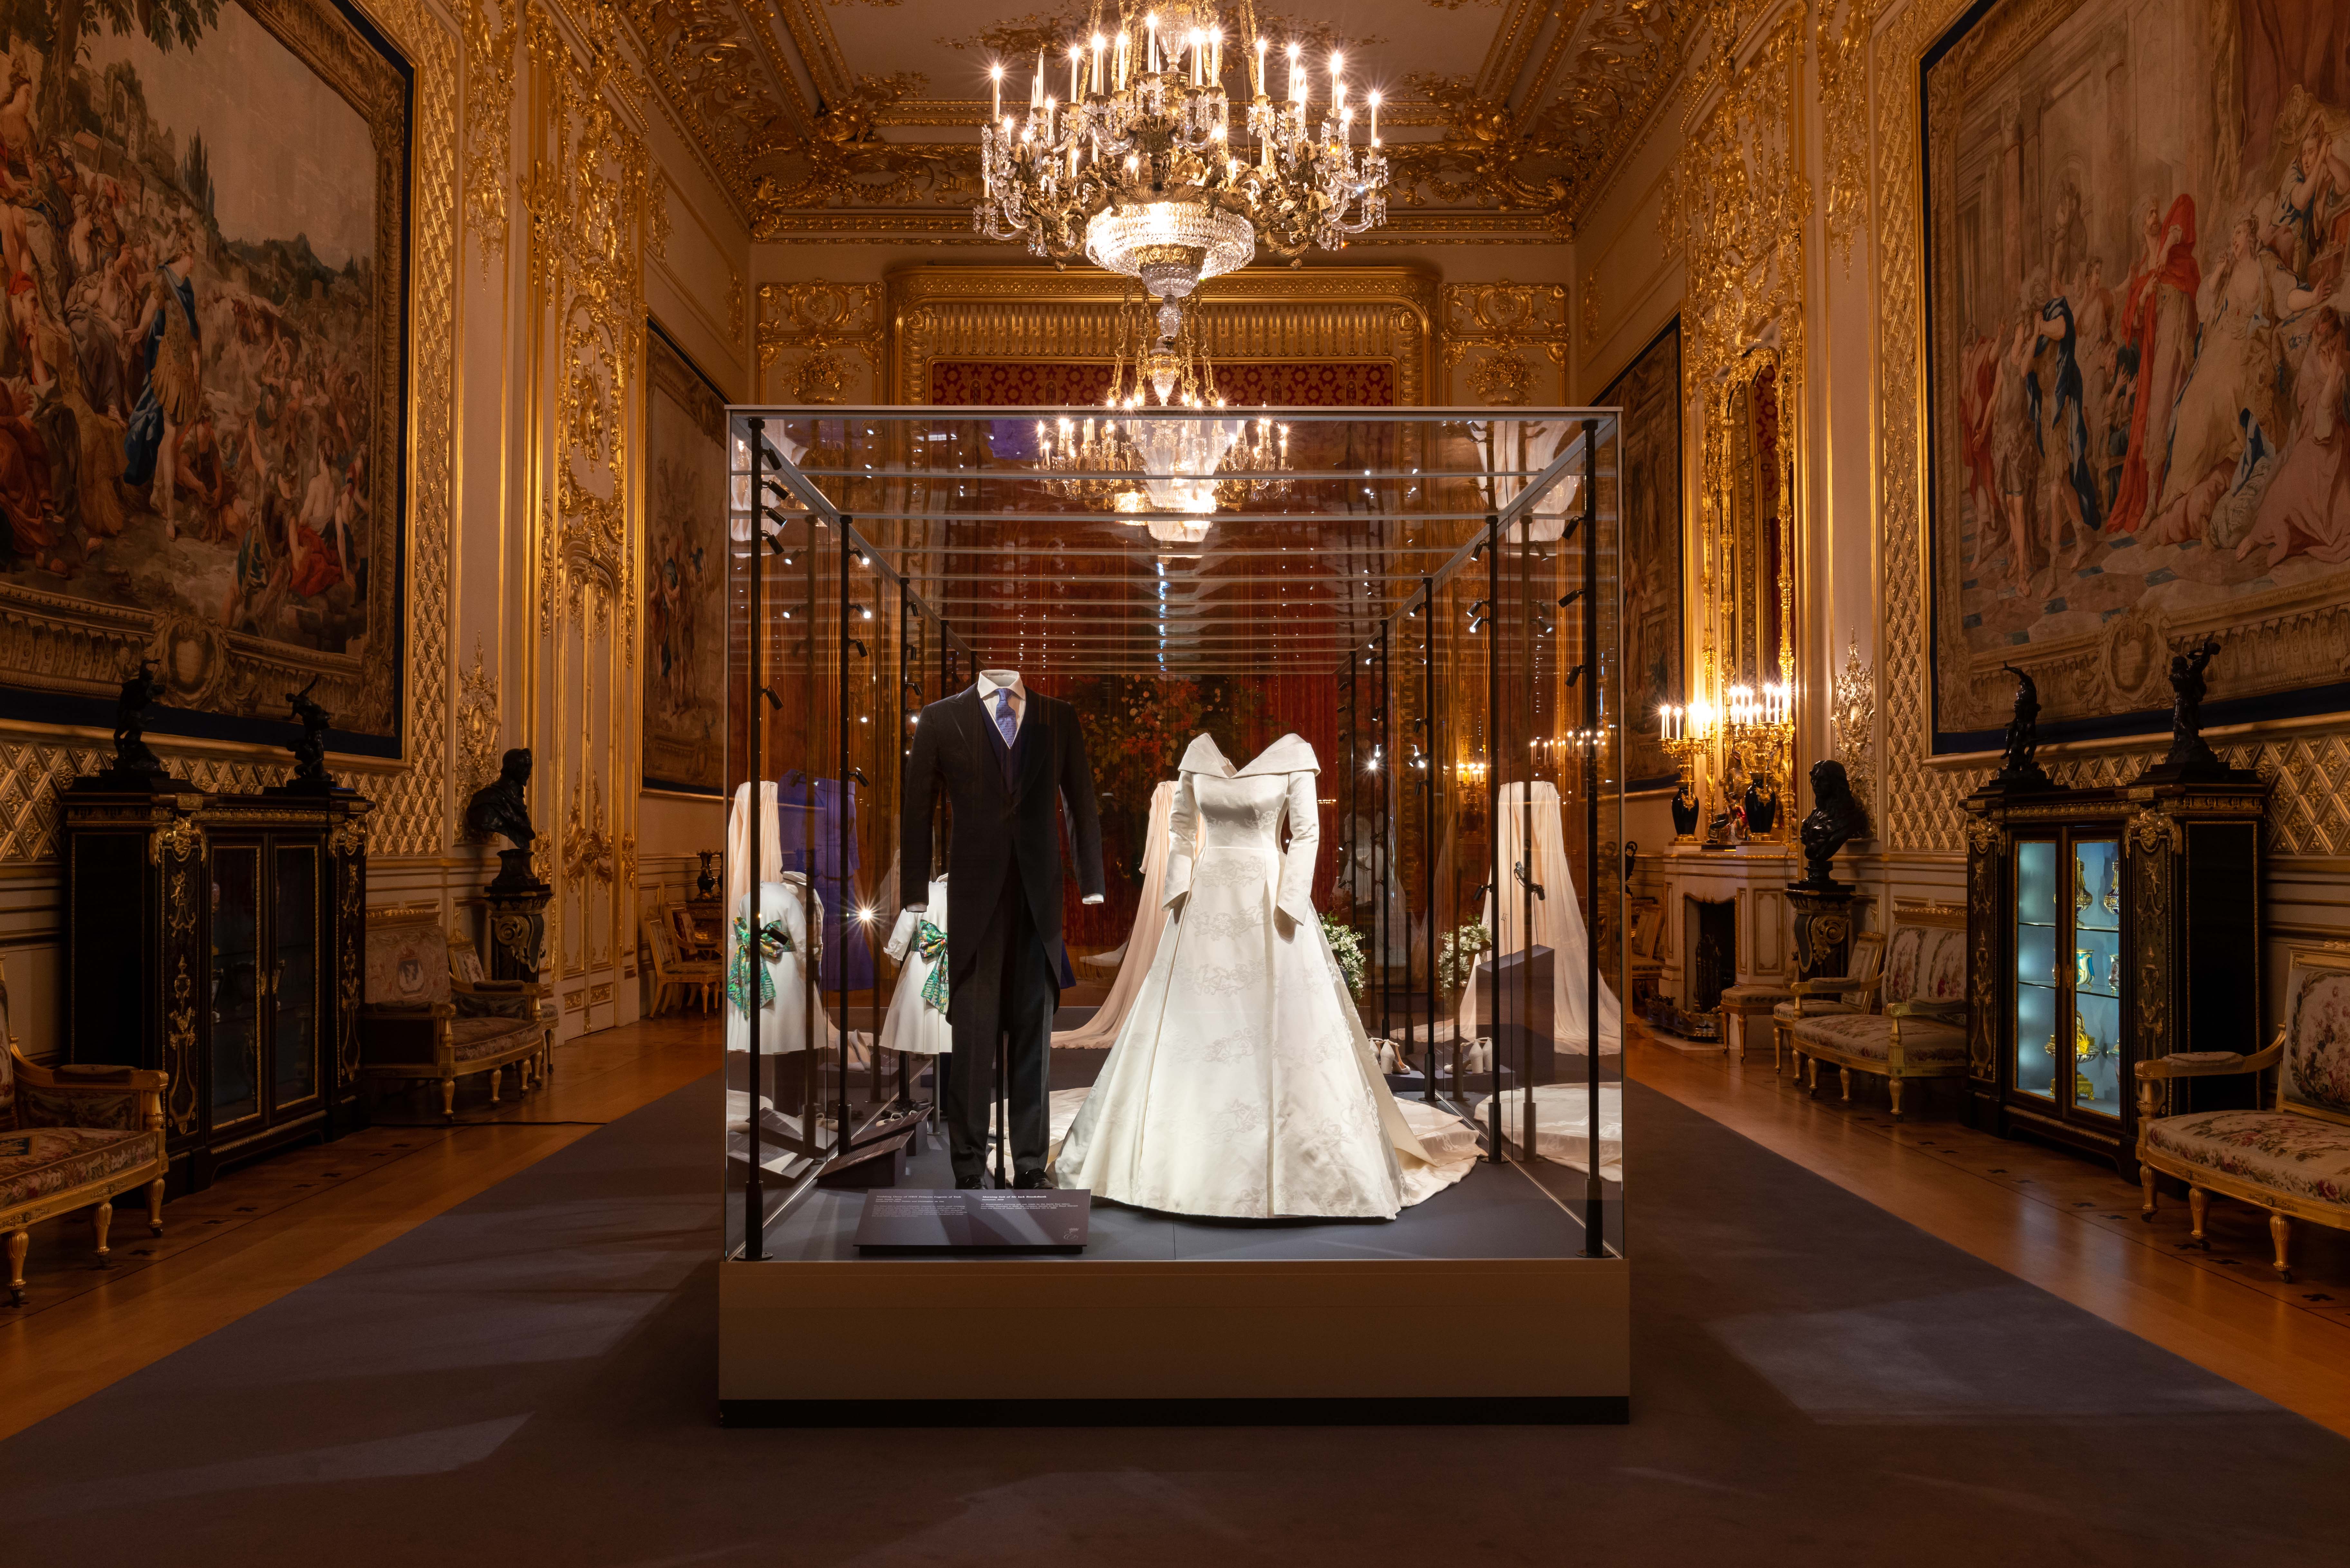 The special exhibition 'A Royal Wedding: HRH Princess Eugenie and Mr Jack Brooksbank' in the Grand Reception Room at Windsor Castle, 1 March - 22 April 2019. Credit: Royal Collection Trust / (c) All Rights Reserved Images are for one-time use only in connection with the special exhibition 'A Royal Wedding: HRH Princess Eugenie and Mr Jack Brooksbank' on display at Windsor Castle (1 March - 22 April 2019).